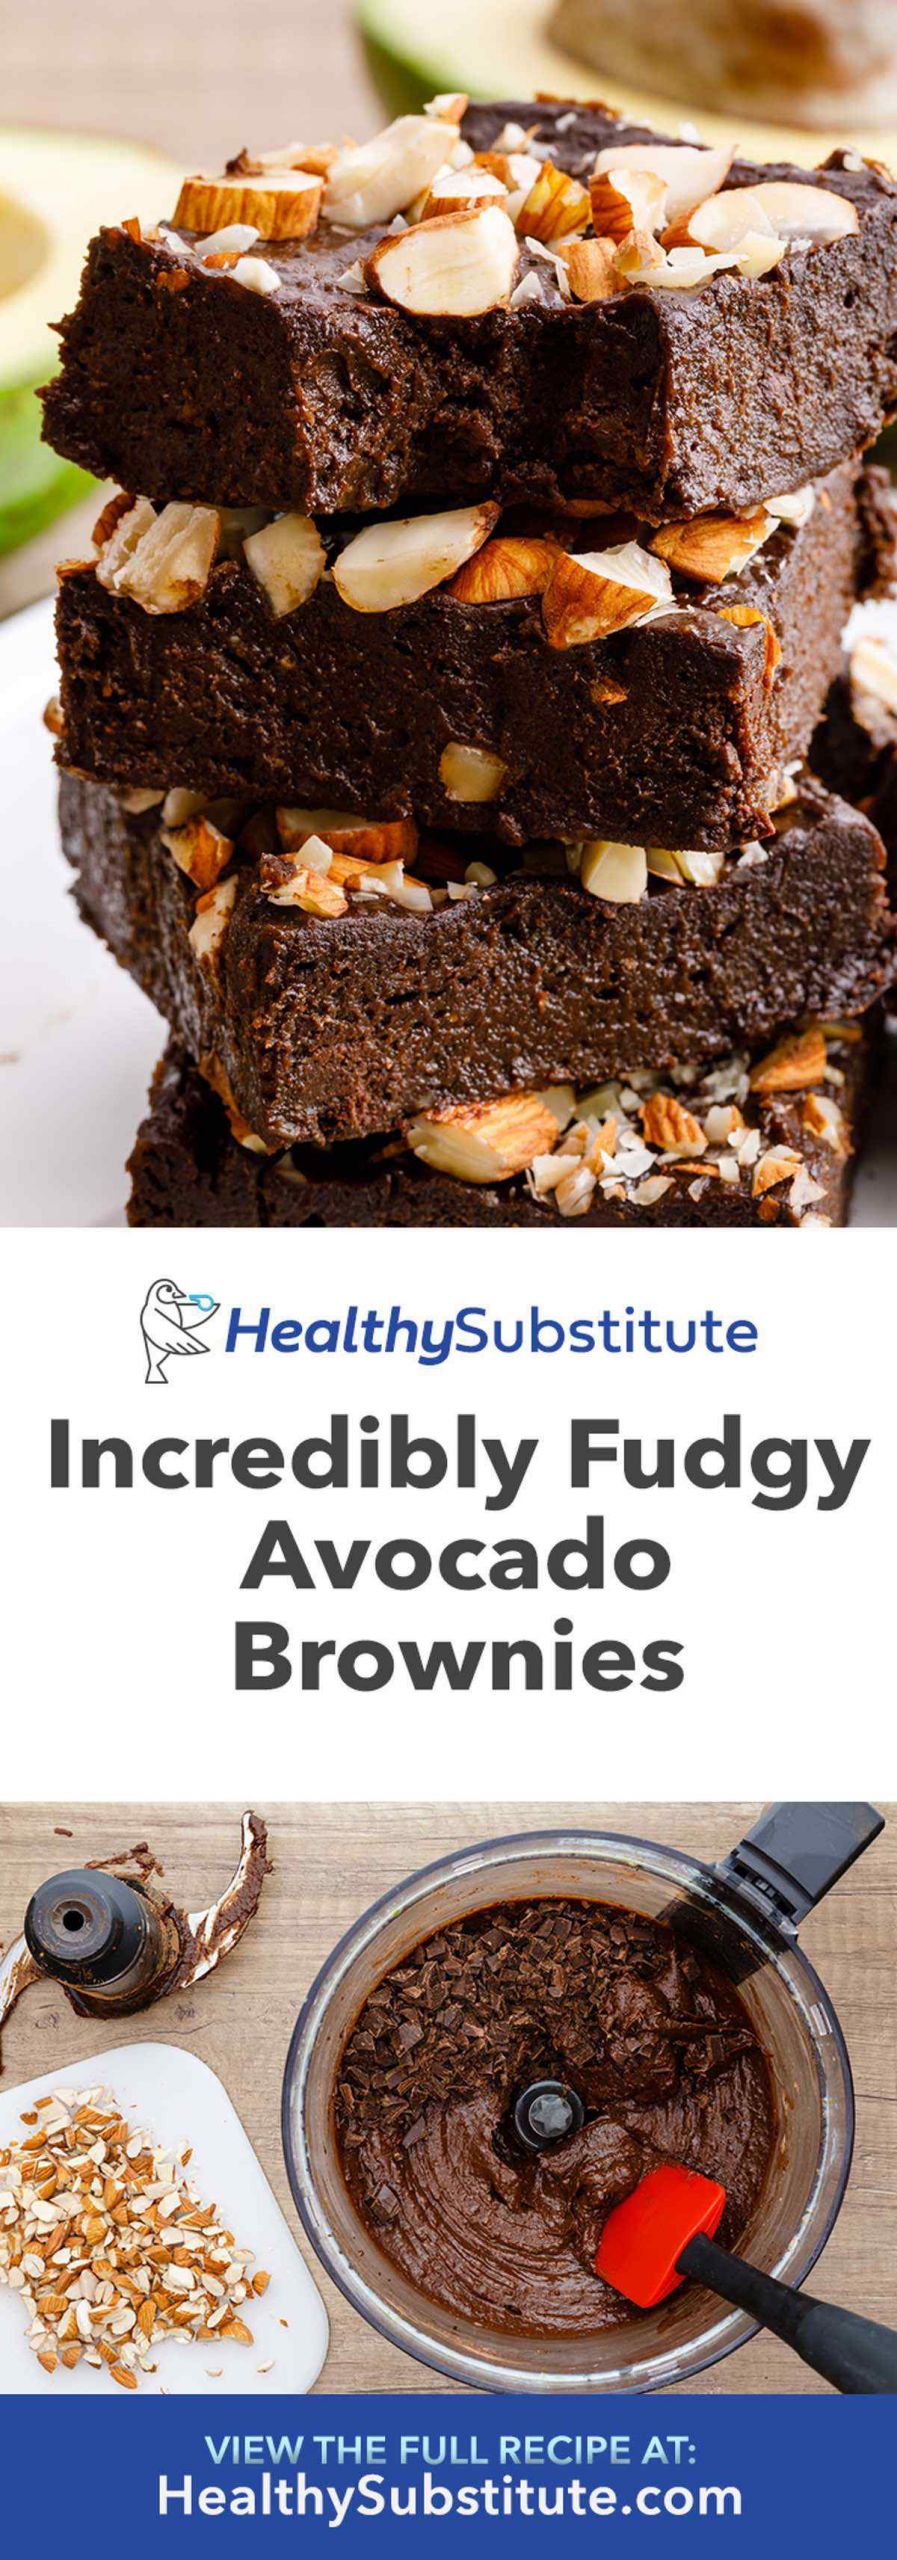 Homemade Brownies Without Eggs
 Incredibly Fudgy Avocado Brownies Easy Egg Substitute